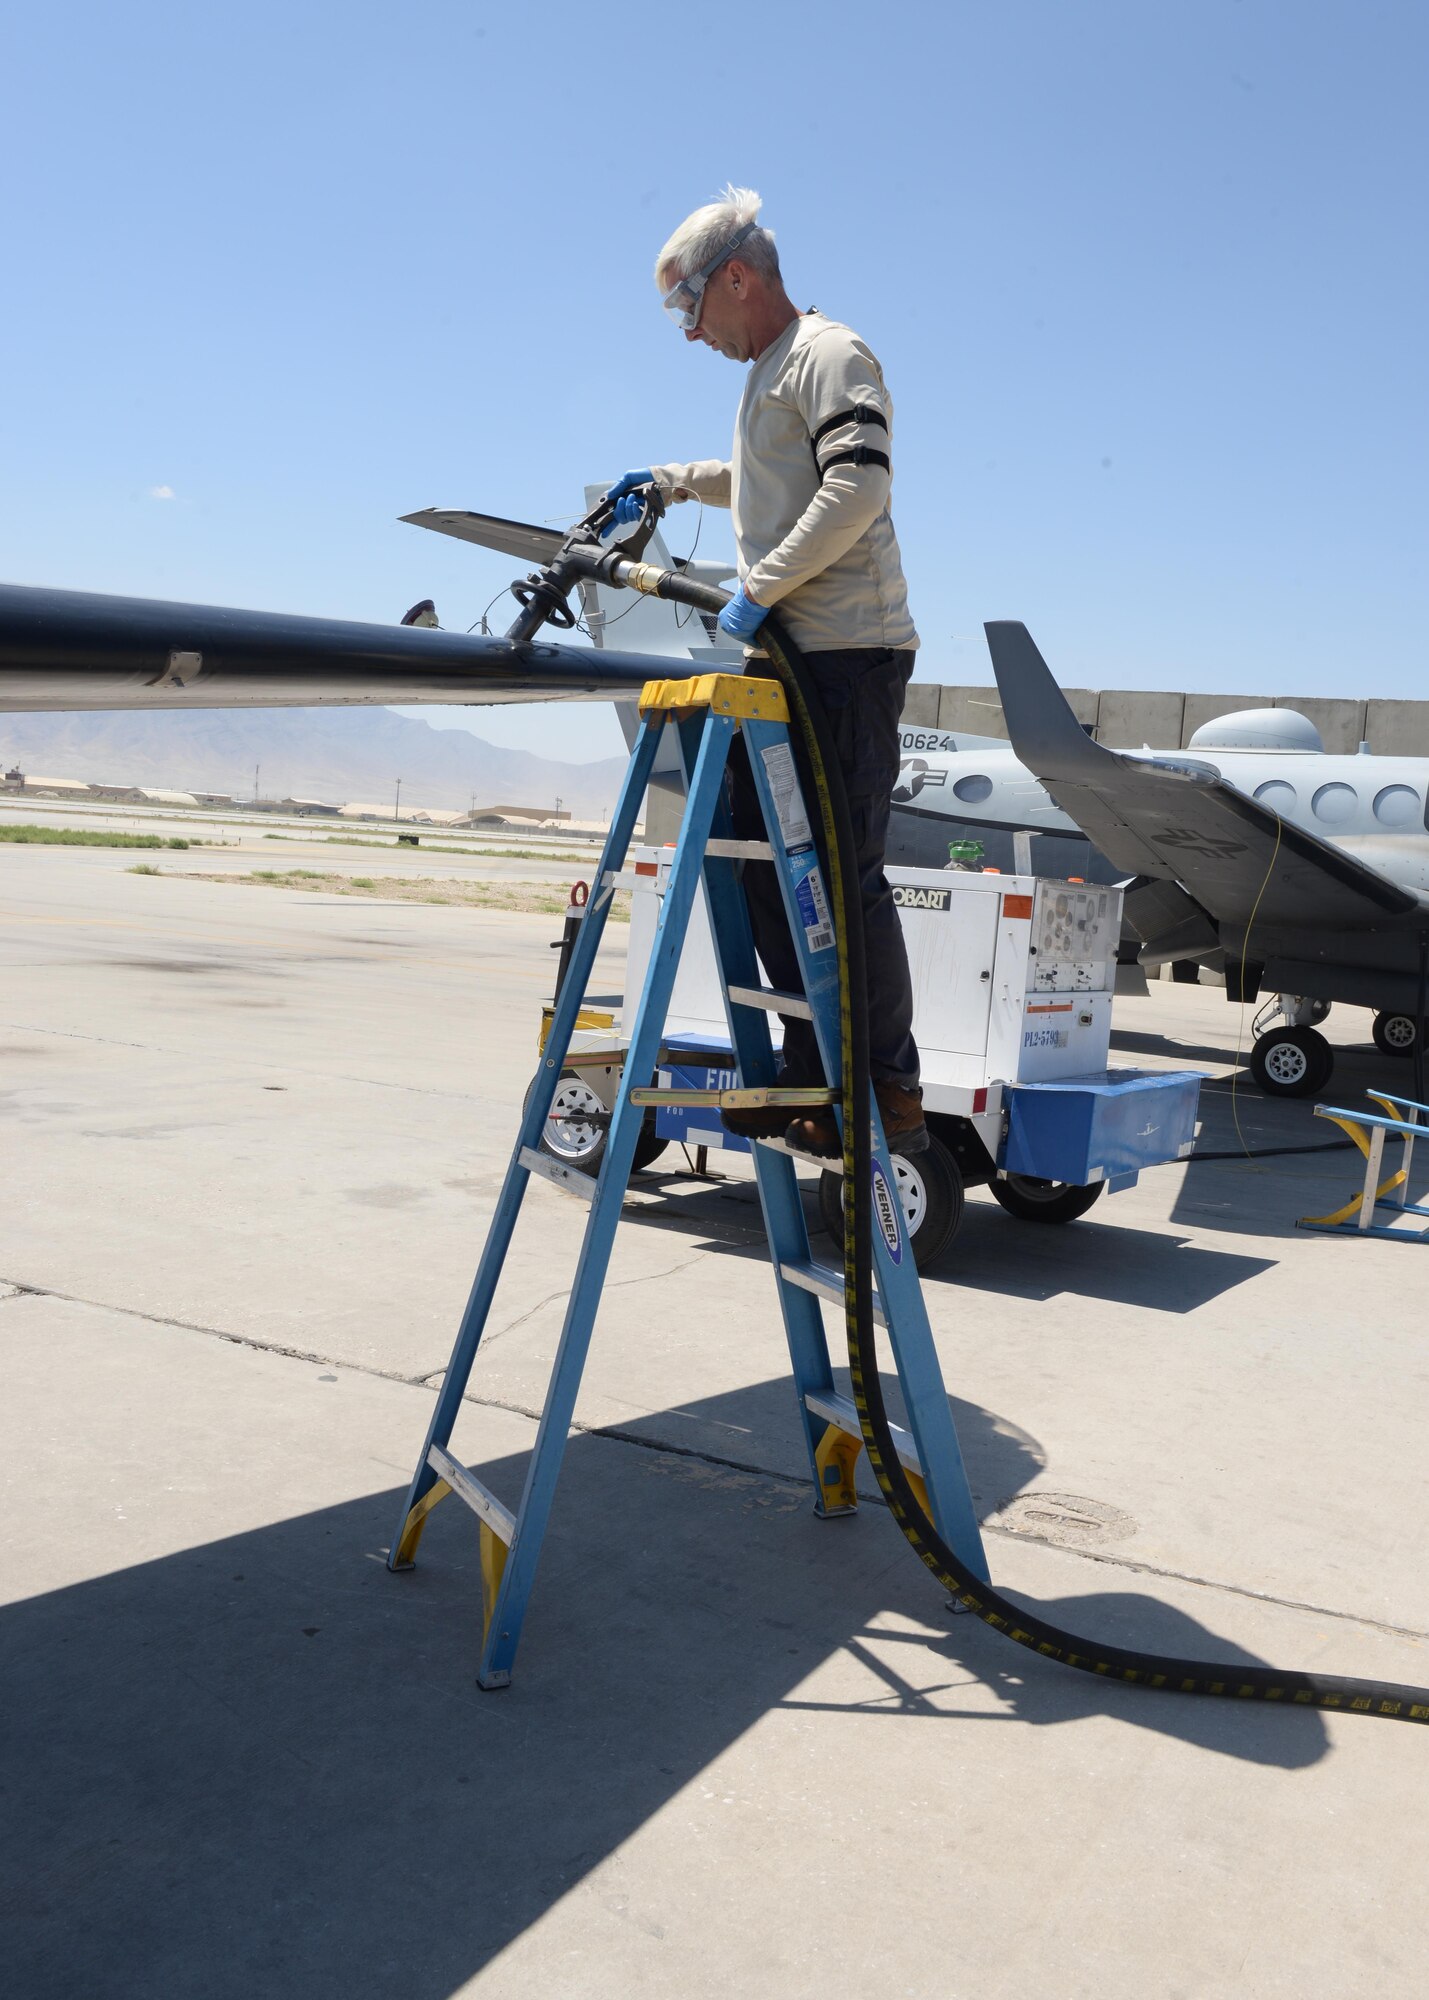 Jeffery Hinchey, 455th Expeditionary Aircraft Maintenance Squadron aircraft mechanic, fuels an MC-12W aircraft prior to its takeoff June 26, 2015, at Bagram, Airfield, Afghanistan. Hinchey is part of the Project Liberty team that is deployed here in support of NATO’s Resolute Support mission. (U.S. Air Force photo by Senior Airman Cierra Presentado/Released)